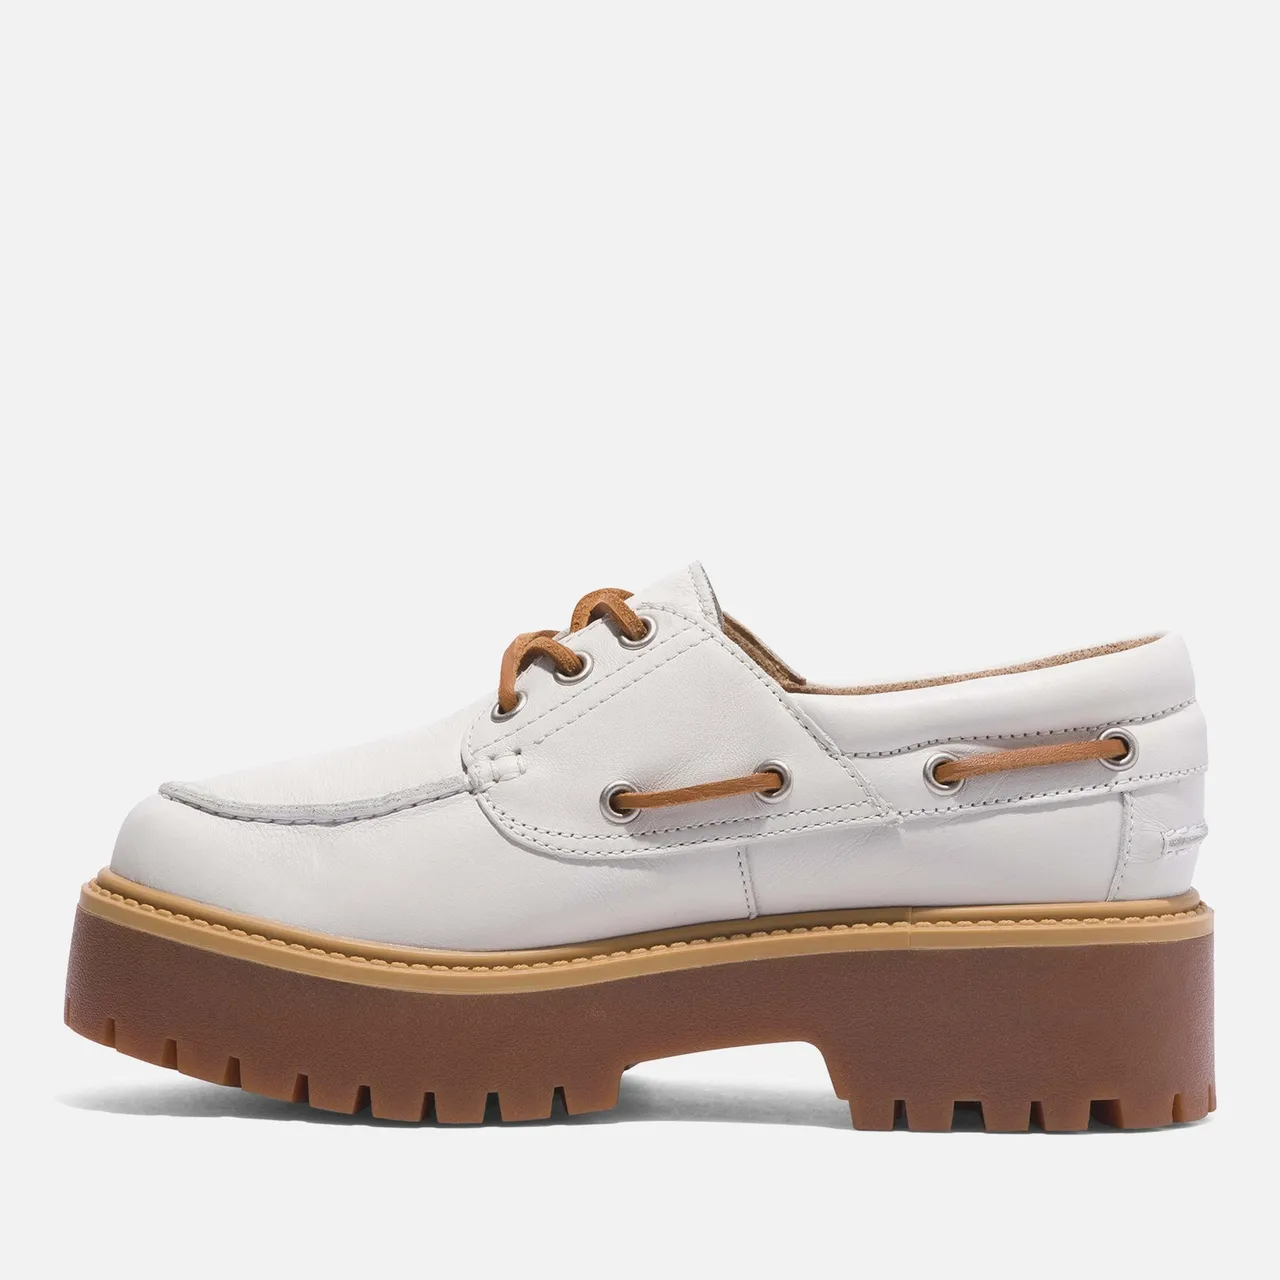 Timberland Women's Stone Street Leather Boat Shoes